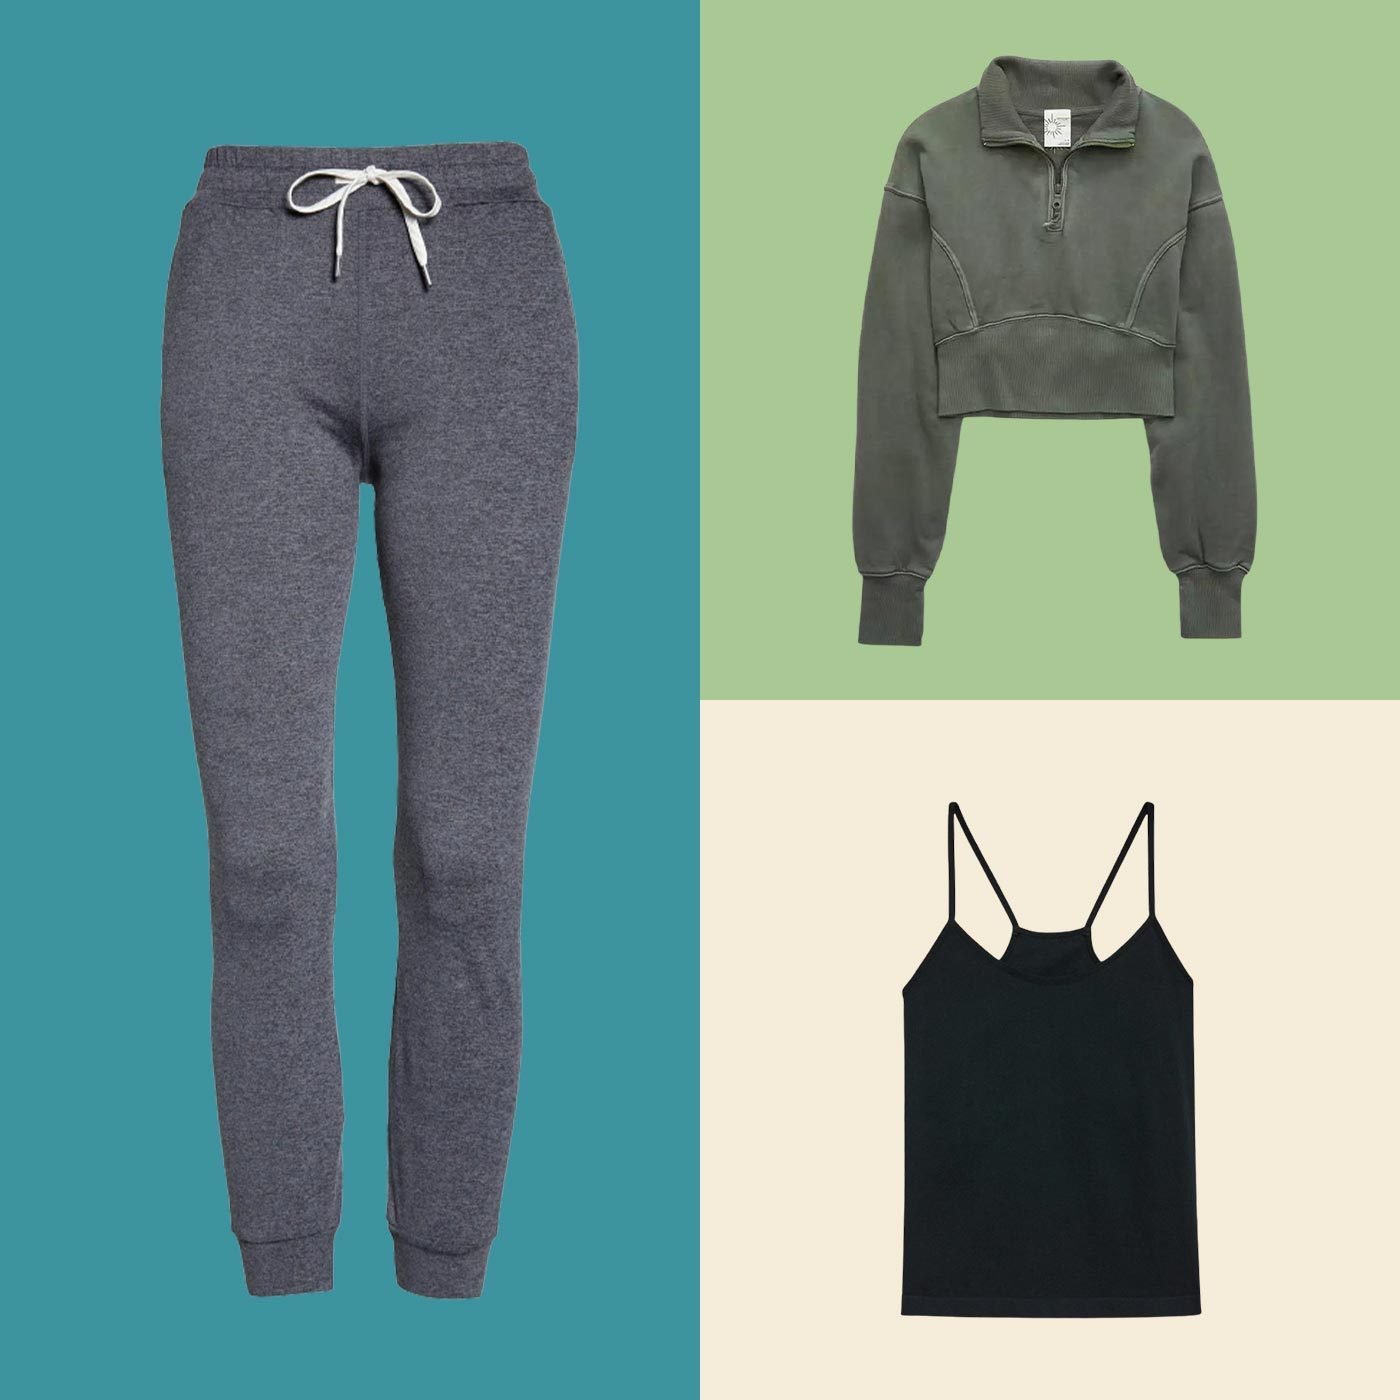 The Best Women's Activewear at Every Price Point: Leggings, Sports Bras